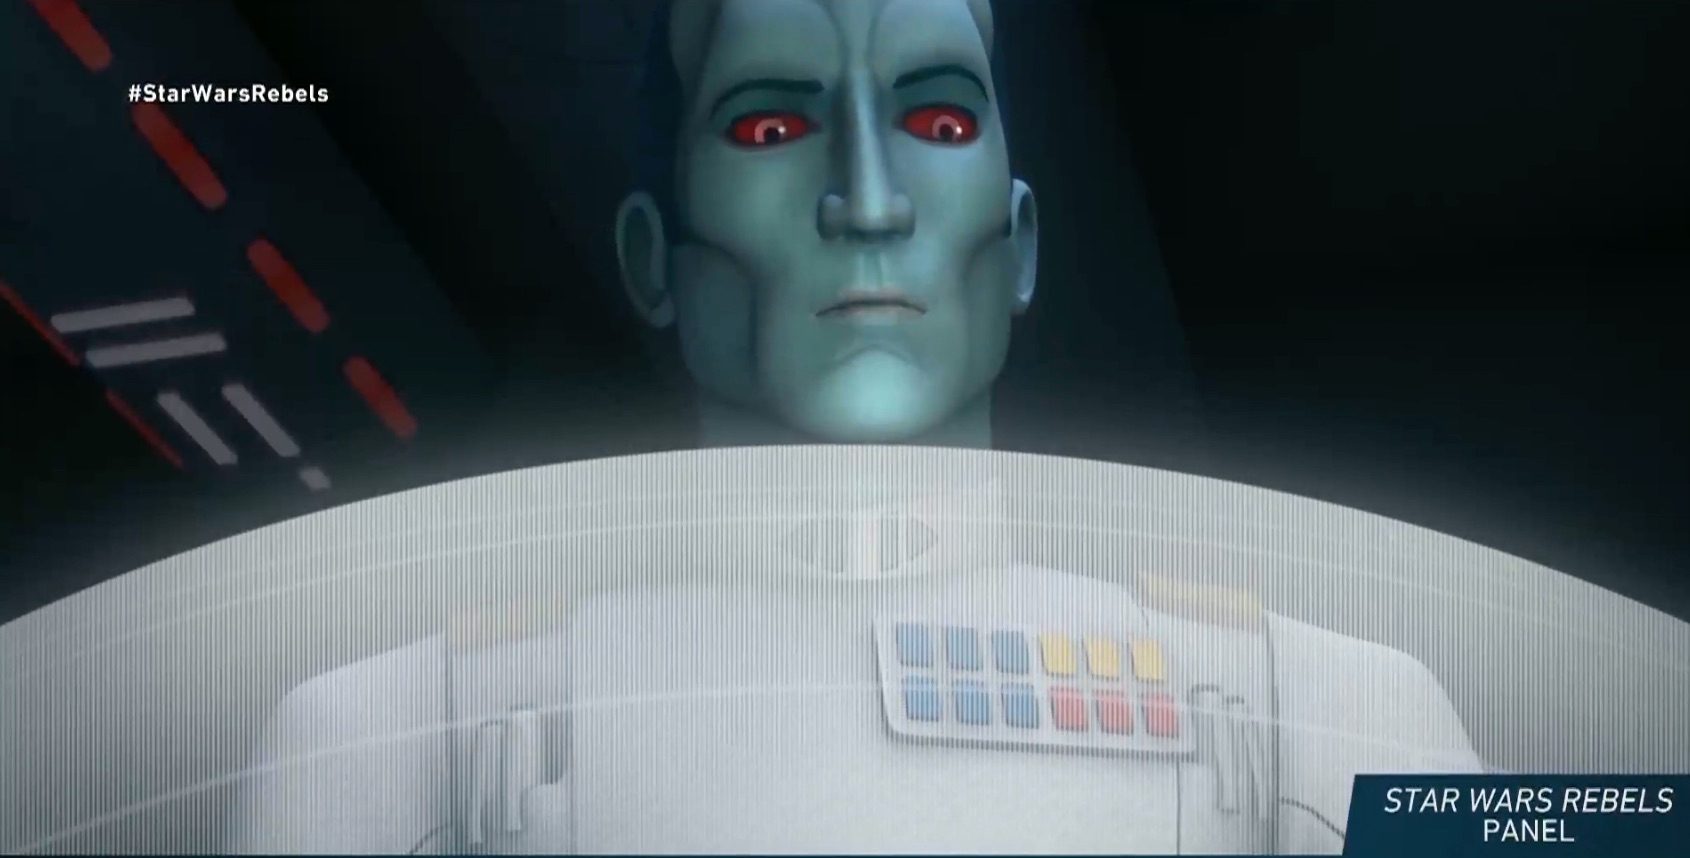 [WATCH] ‘Star Wars Rebels’: Major villain revealed, and more!